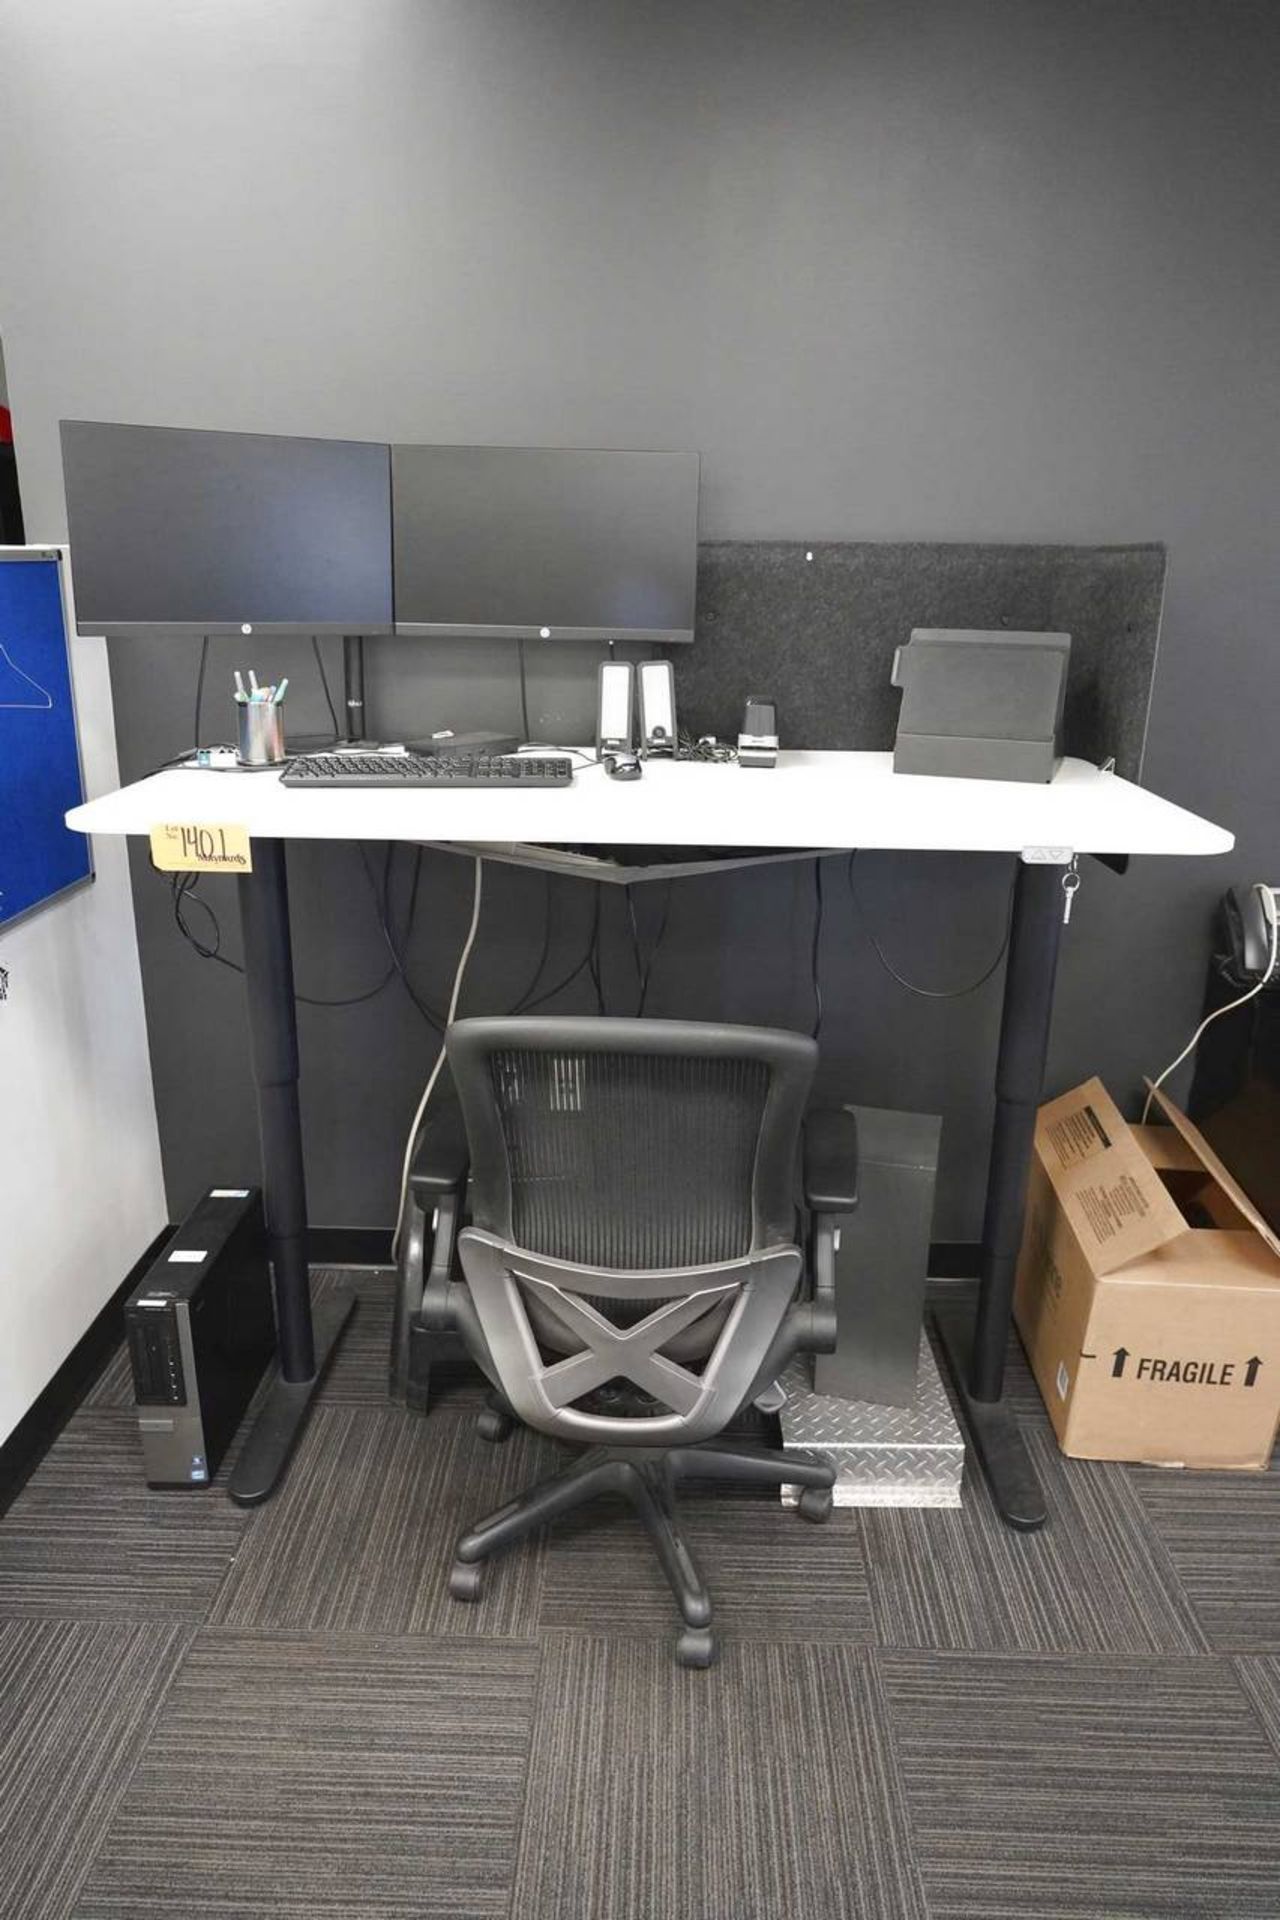 Ikea Bekant Sit to Stand Height Adjustable Work Station